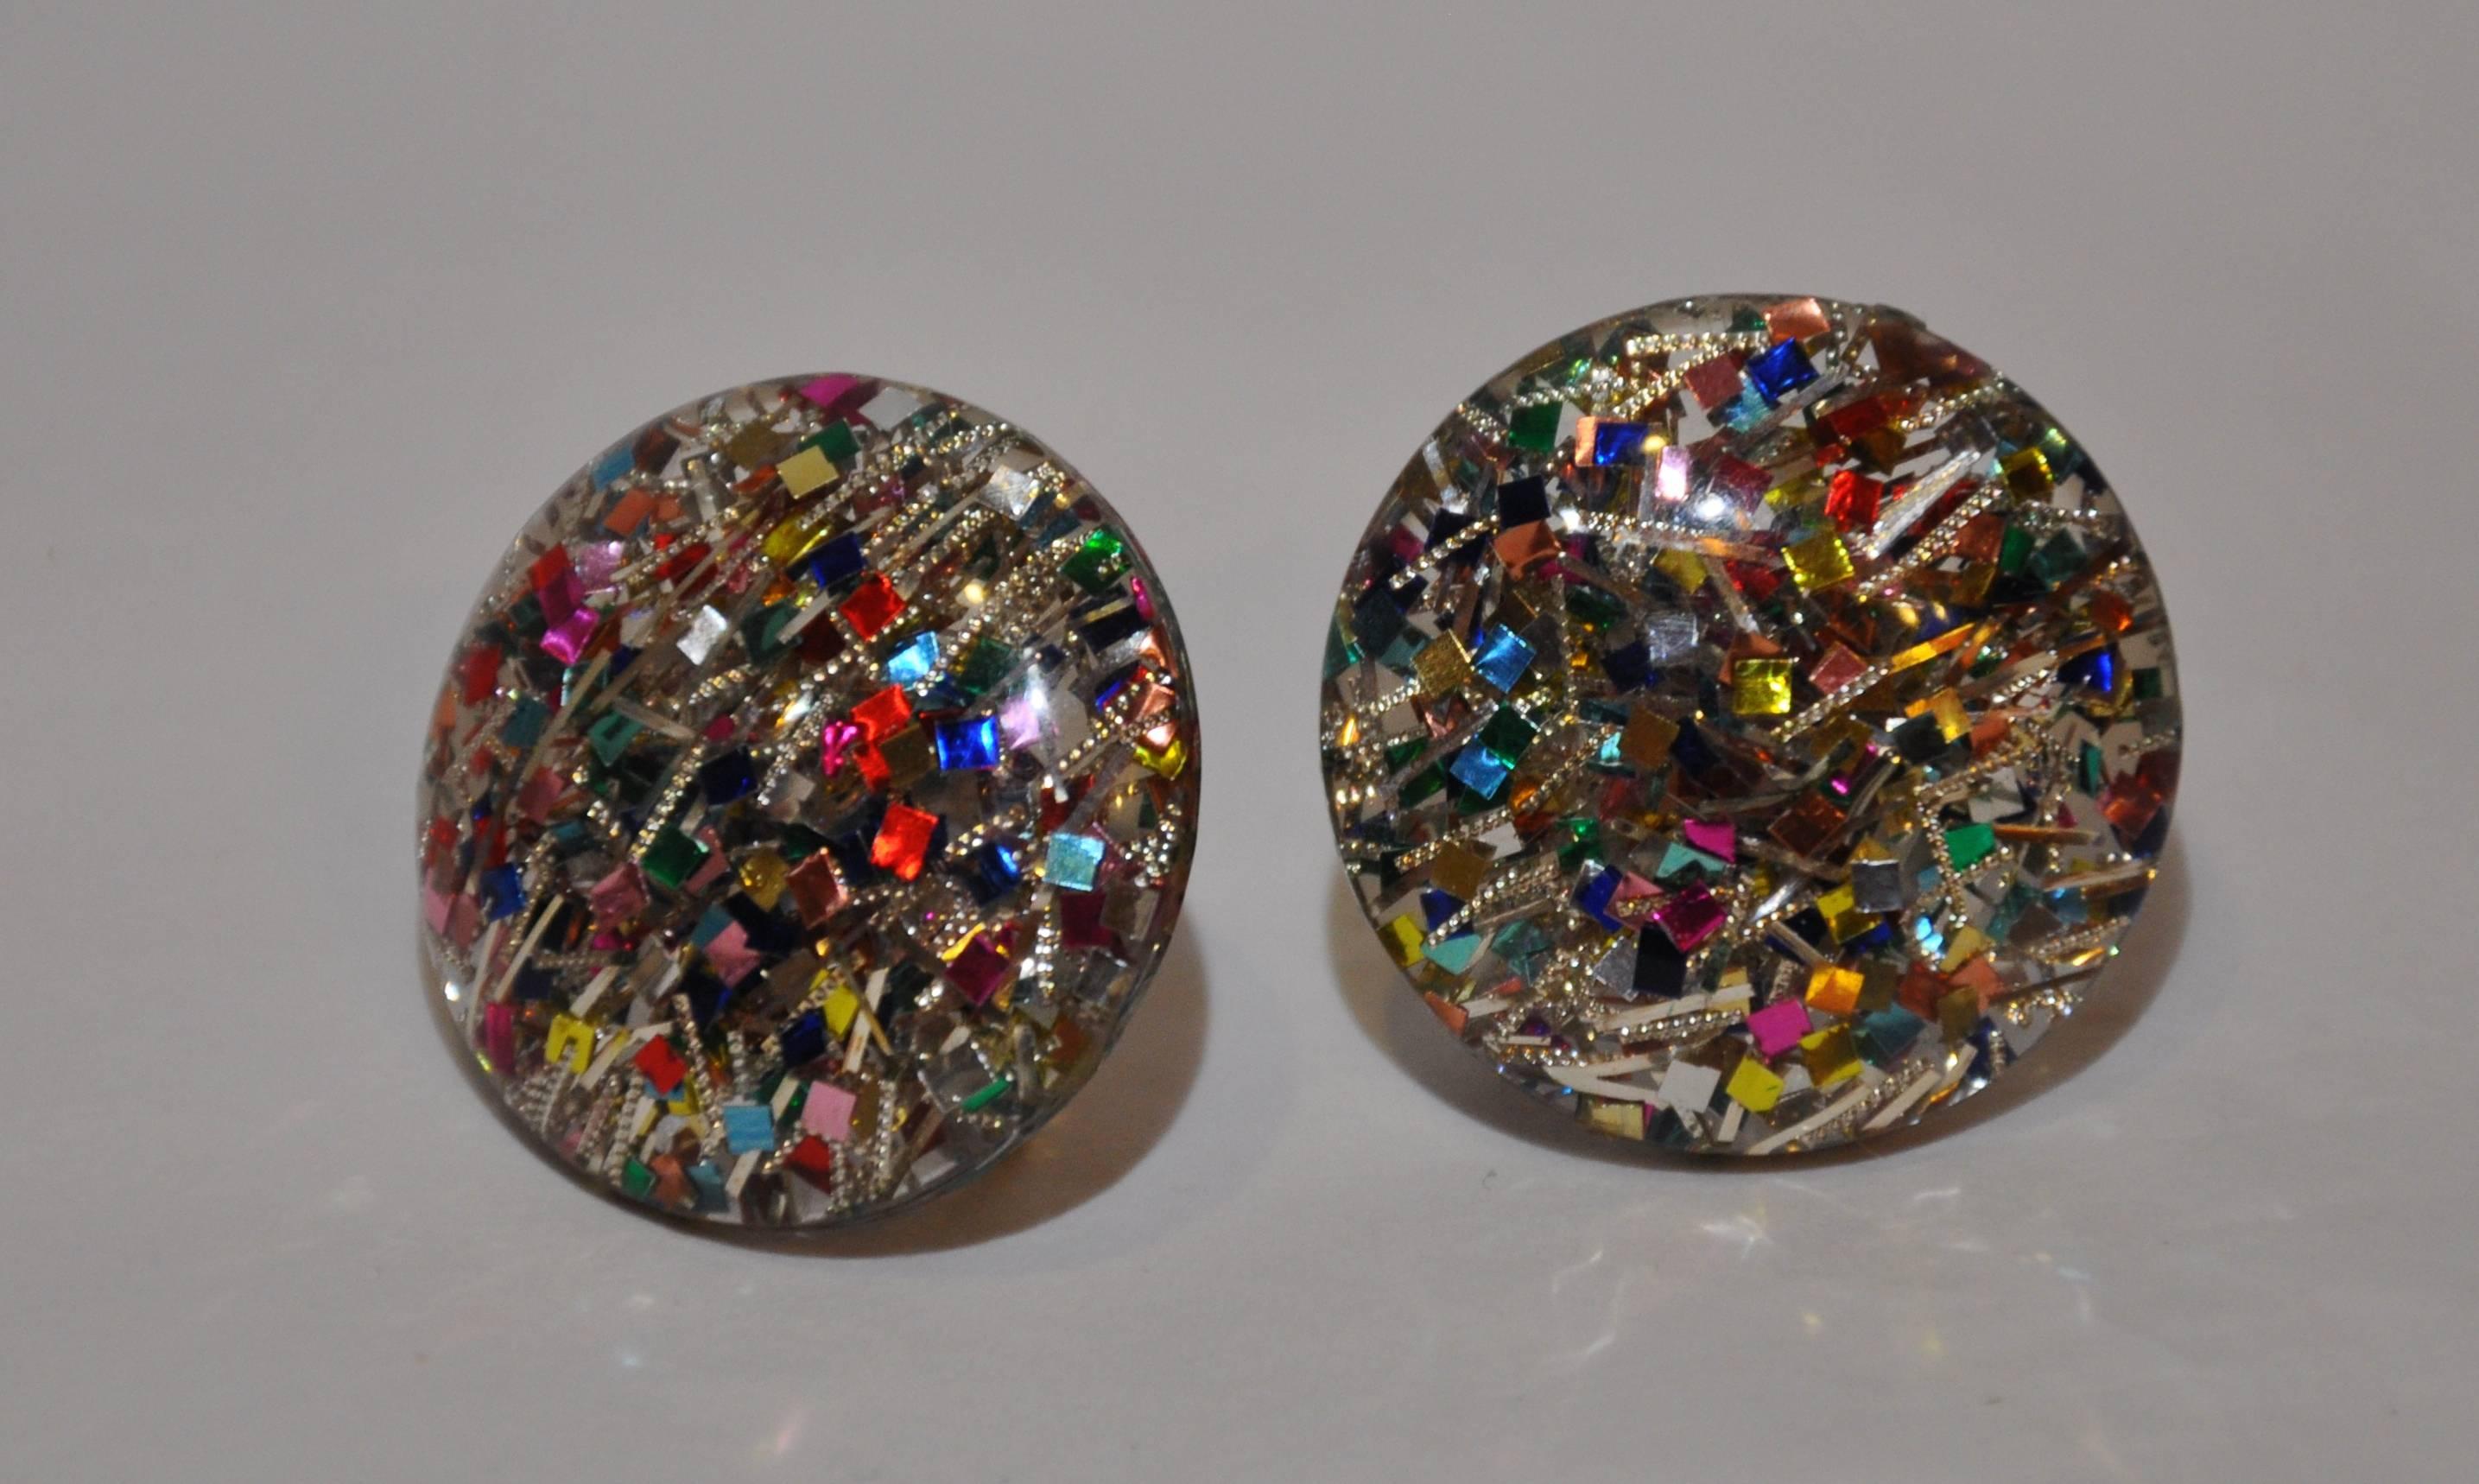          Large clear lucite screw-back earrings are accented with multi-colors of "confetti" wonderfully blended within. The width and length measures 1 1/8". The depth measures 1/2".